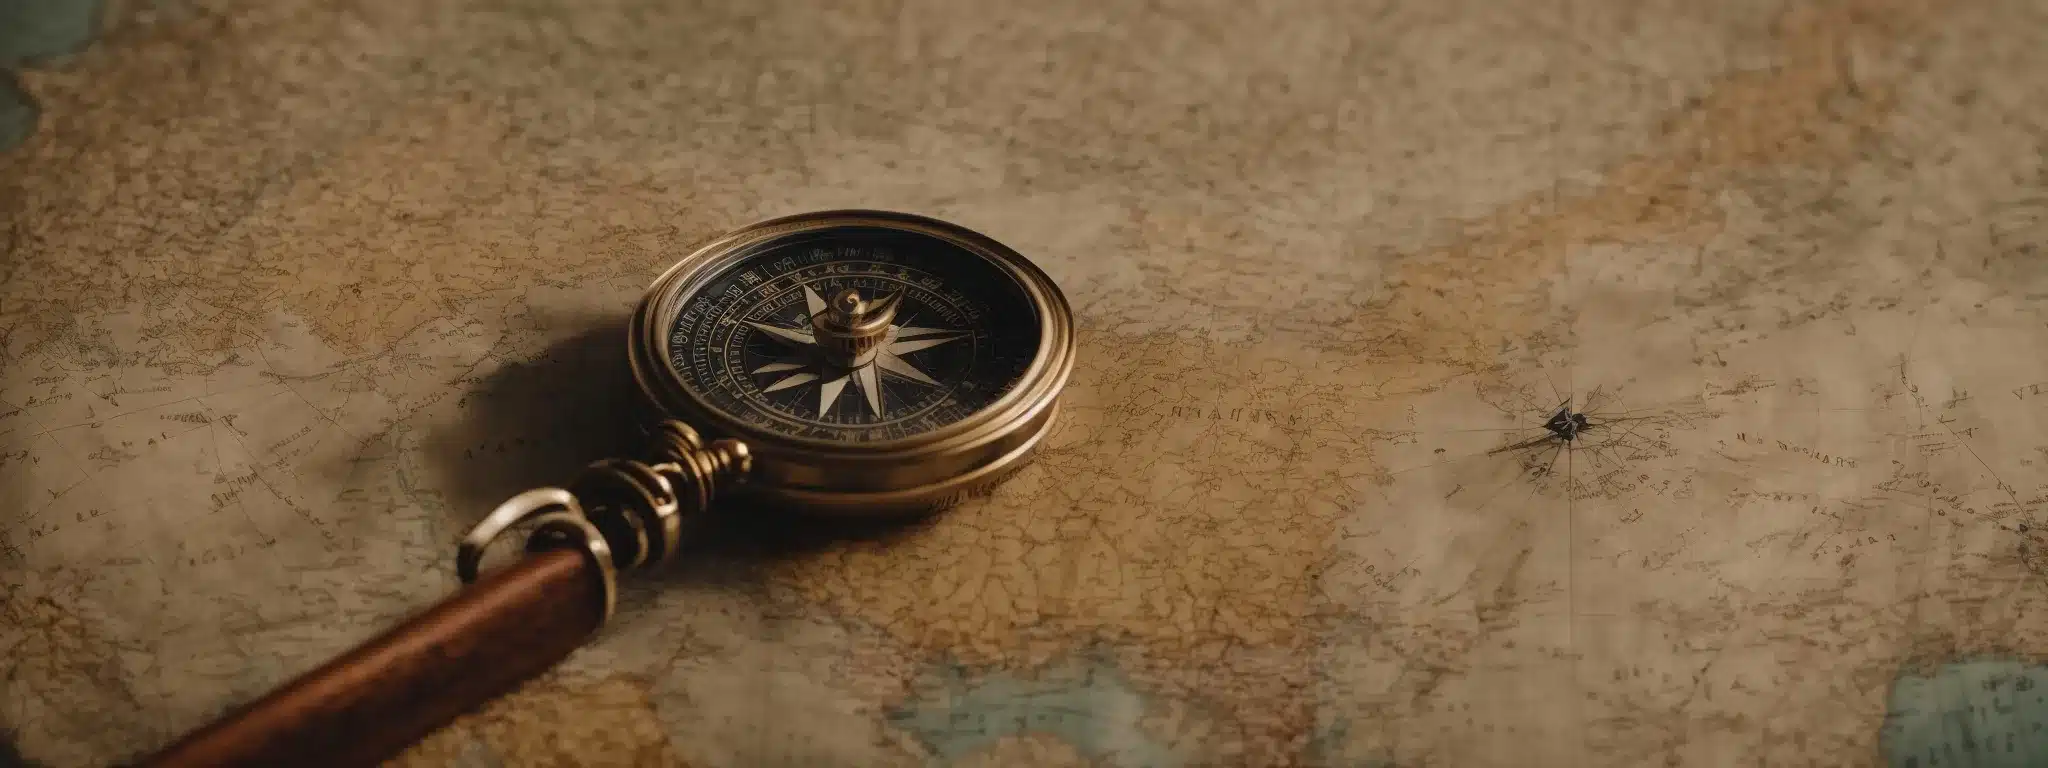 A Vintage Compass Laying On Top Of An Ancient, Weathered Map Amidst Navigation Tools, Symbolizing Strategic Planning And Exploration.